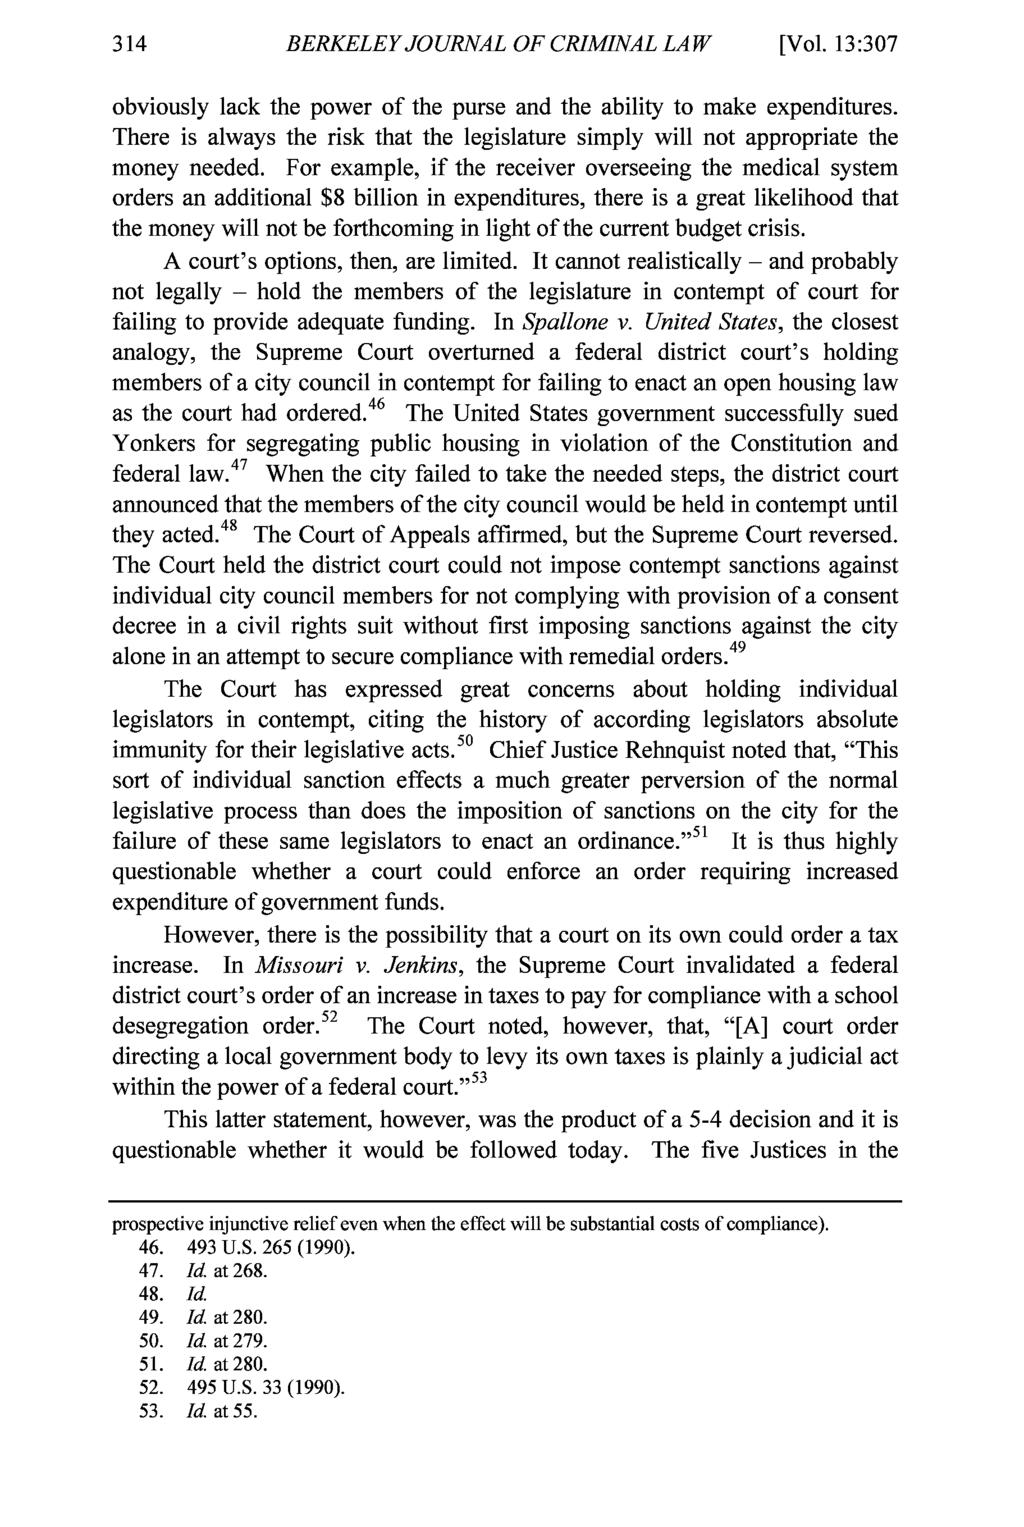 BERKELEY JOURNAL OF CRIMINAL LAW Berkeley Journal of Criminal Law, Vol. 13, Iss. 2 [2008], Art. 5 [Vol. 13:307 obviously lack the power of the purse and the ability to make expenditures.